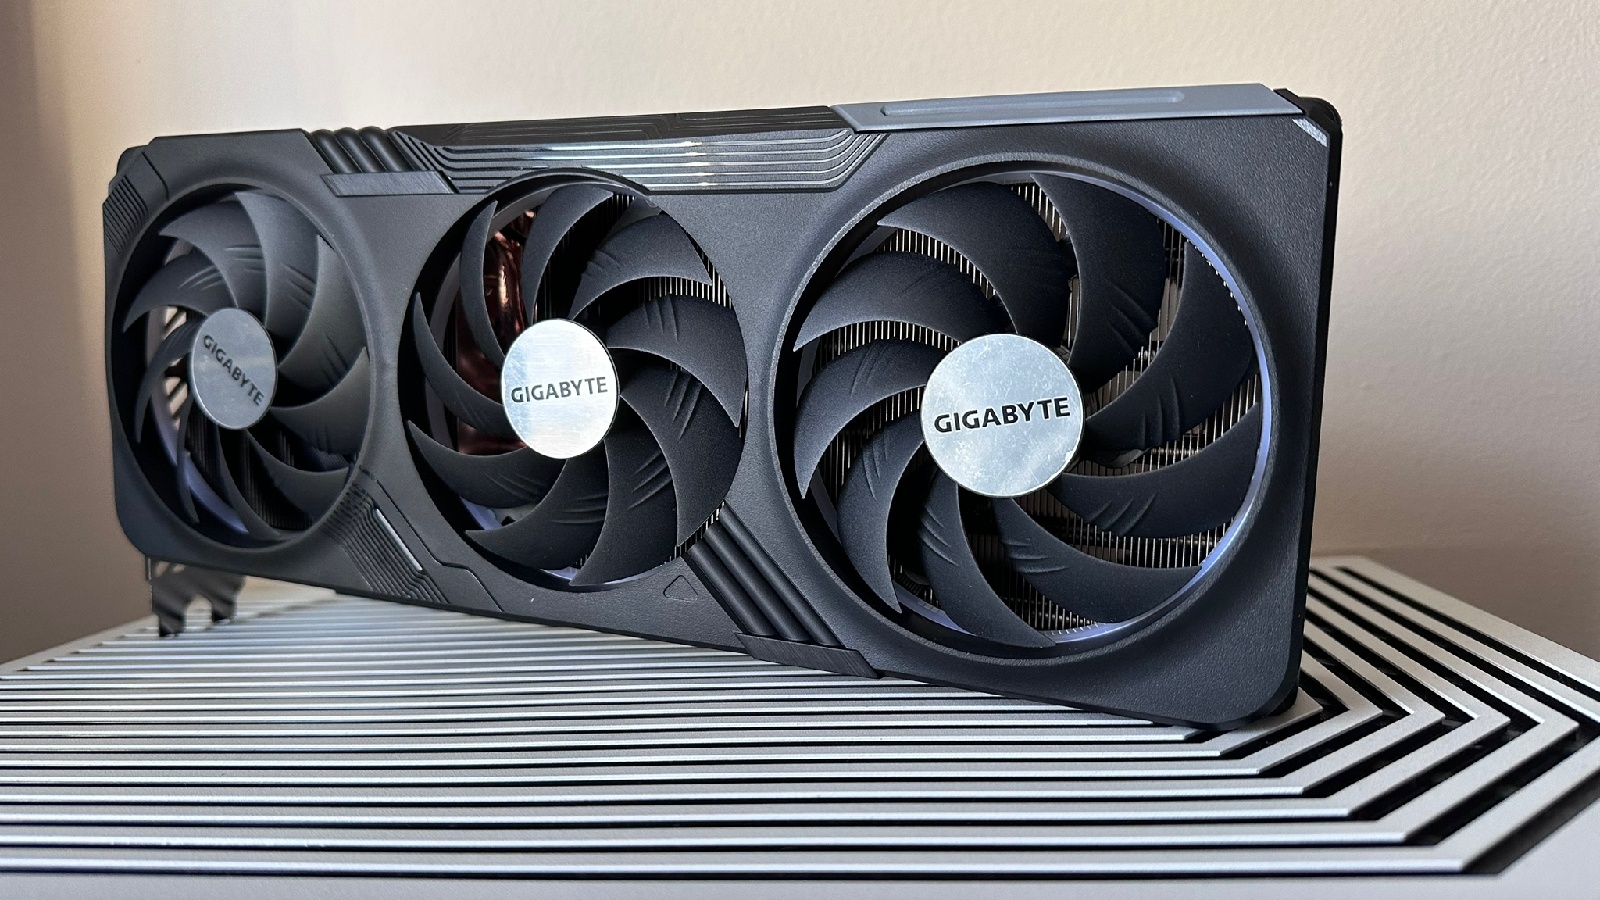 ASUS GeForce RTX 4070 SUPER DUAL with 12GB memory has been leaked